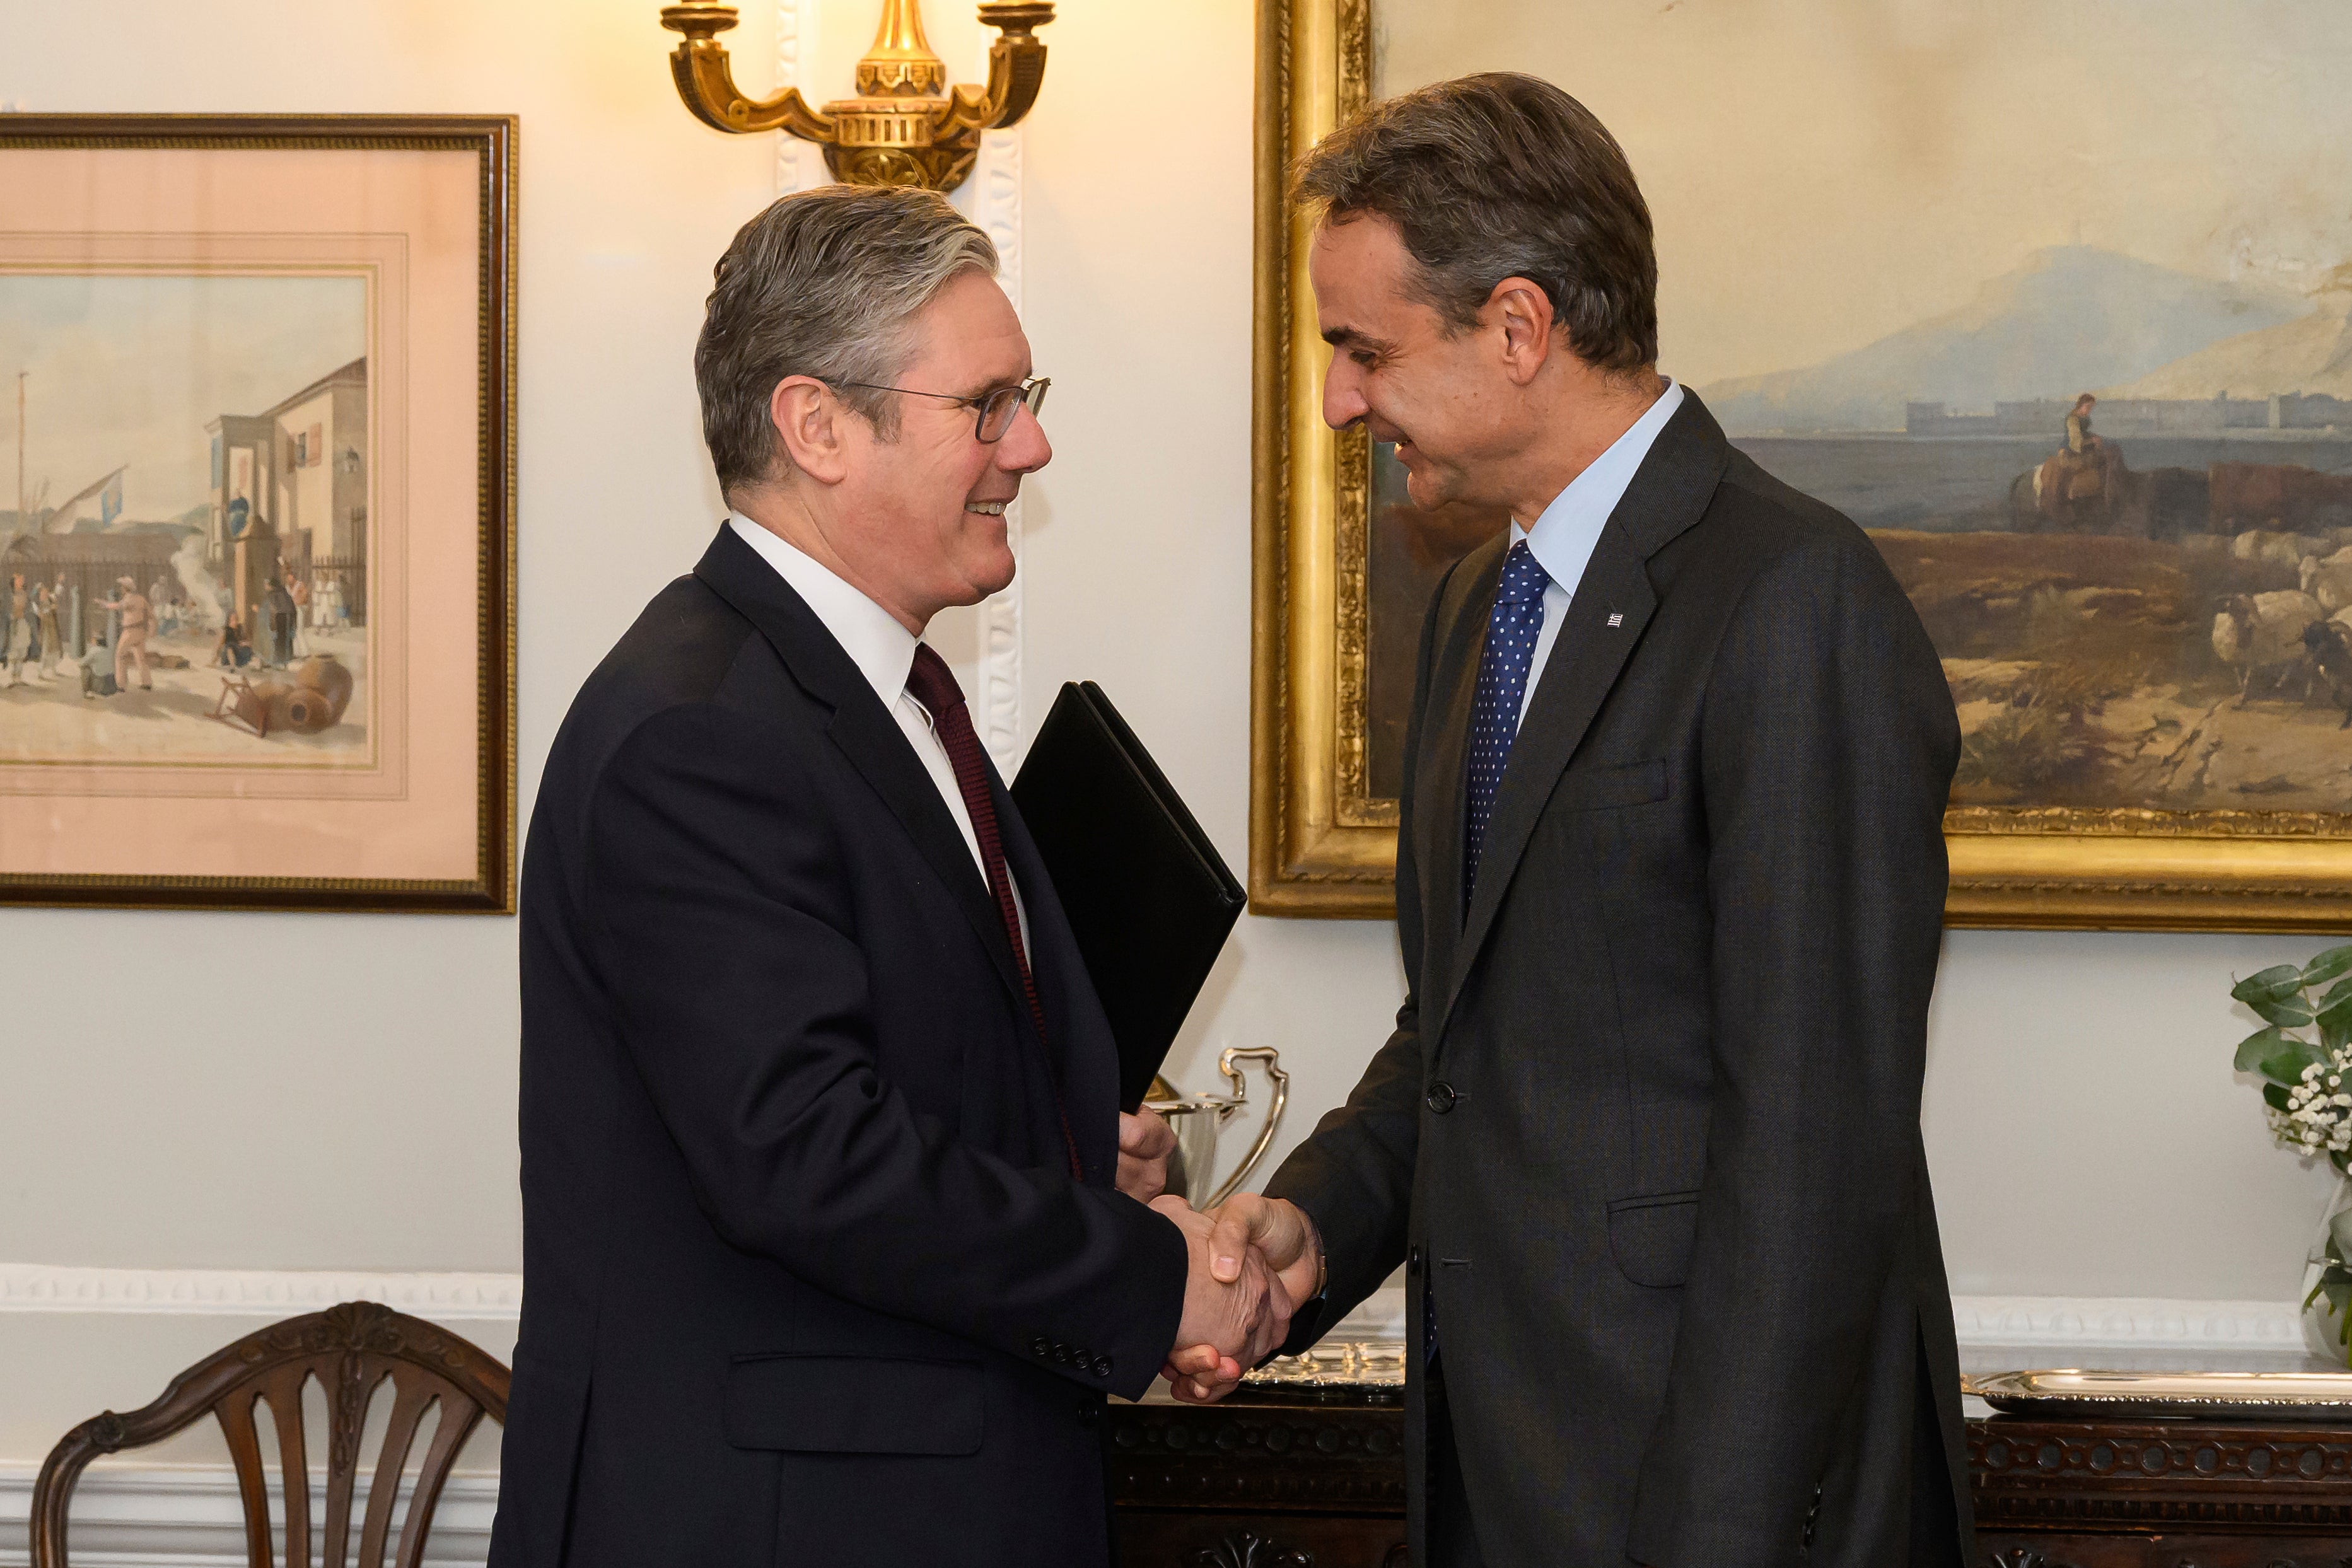 Sir Keir Starmer met with the Greek PM in London on Monday